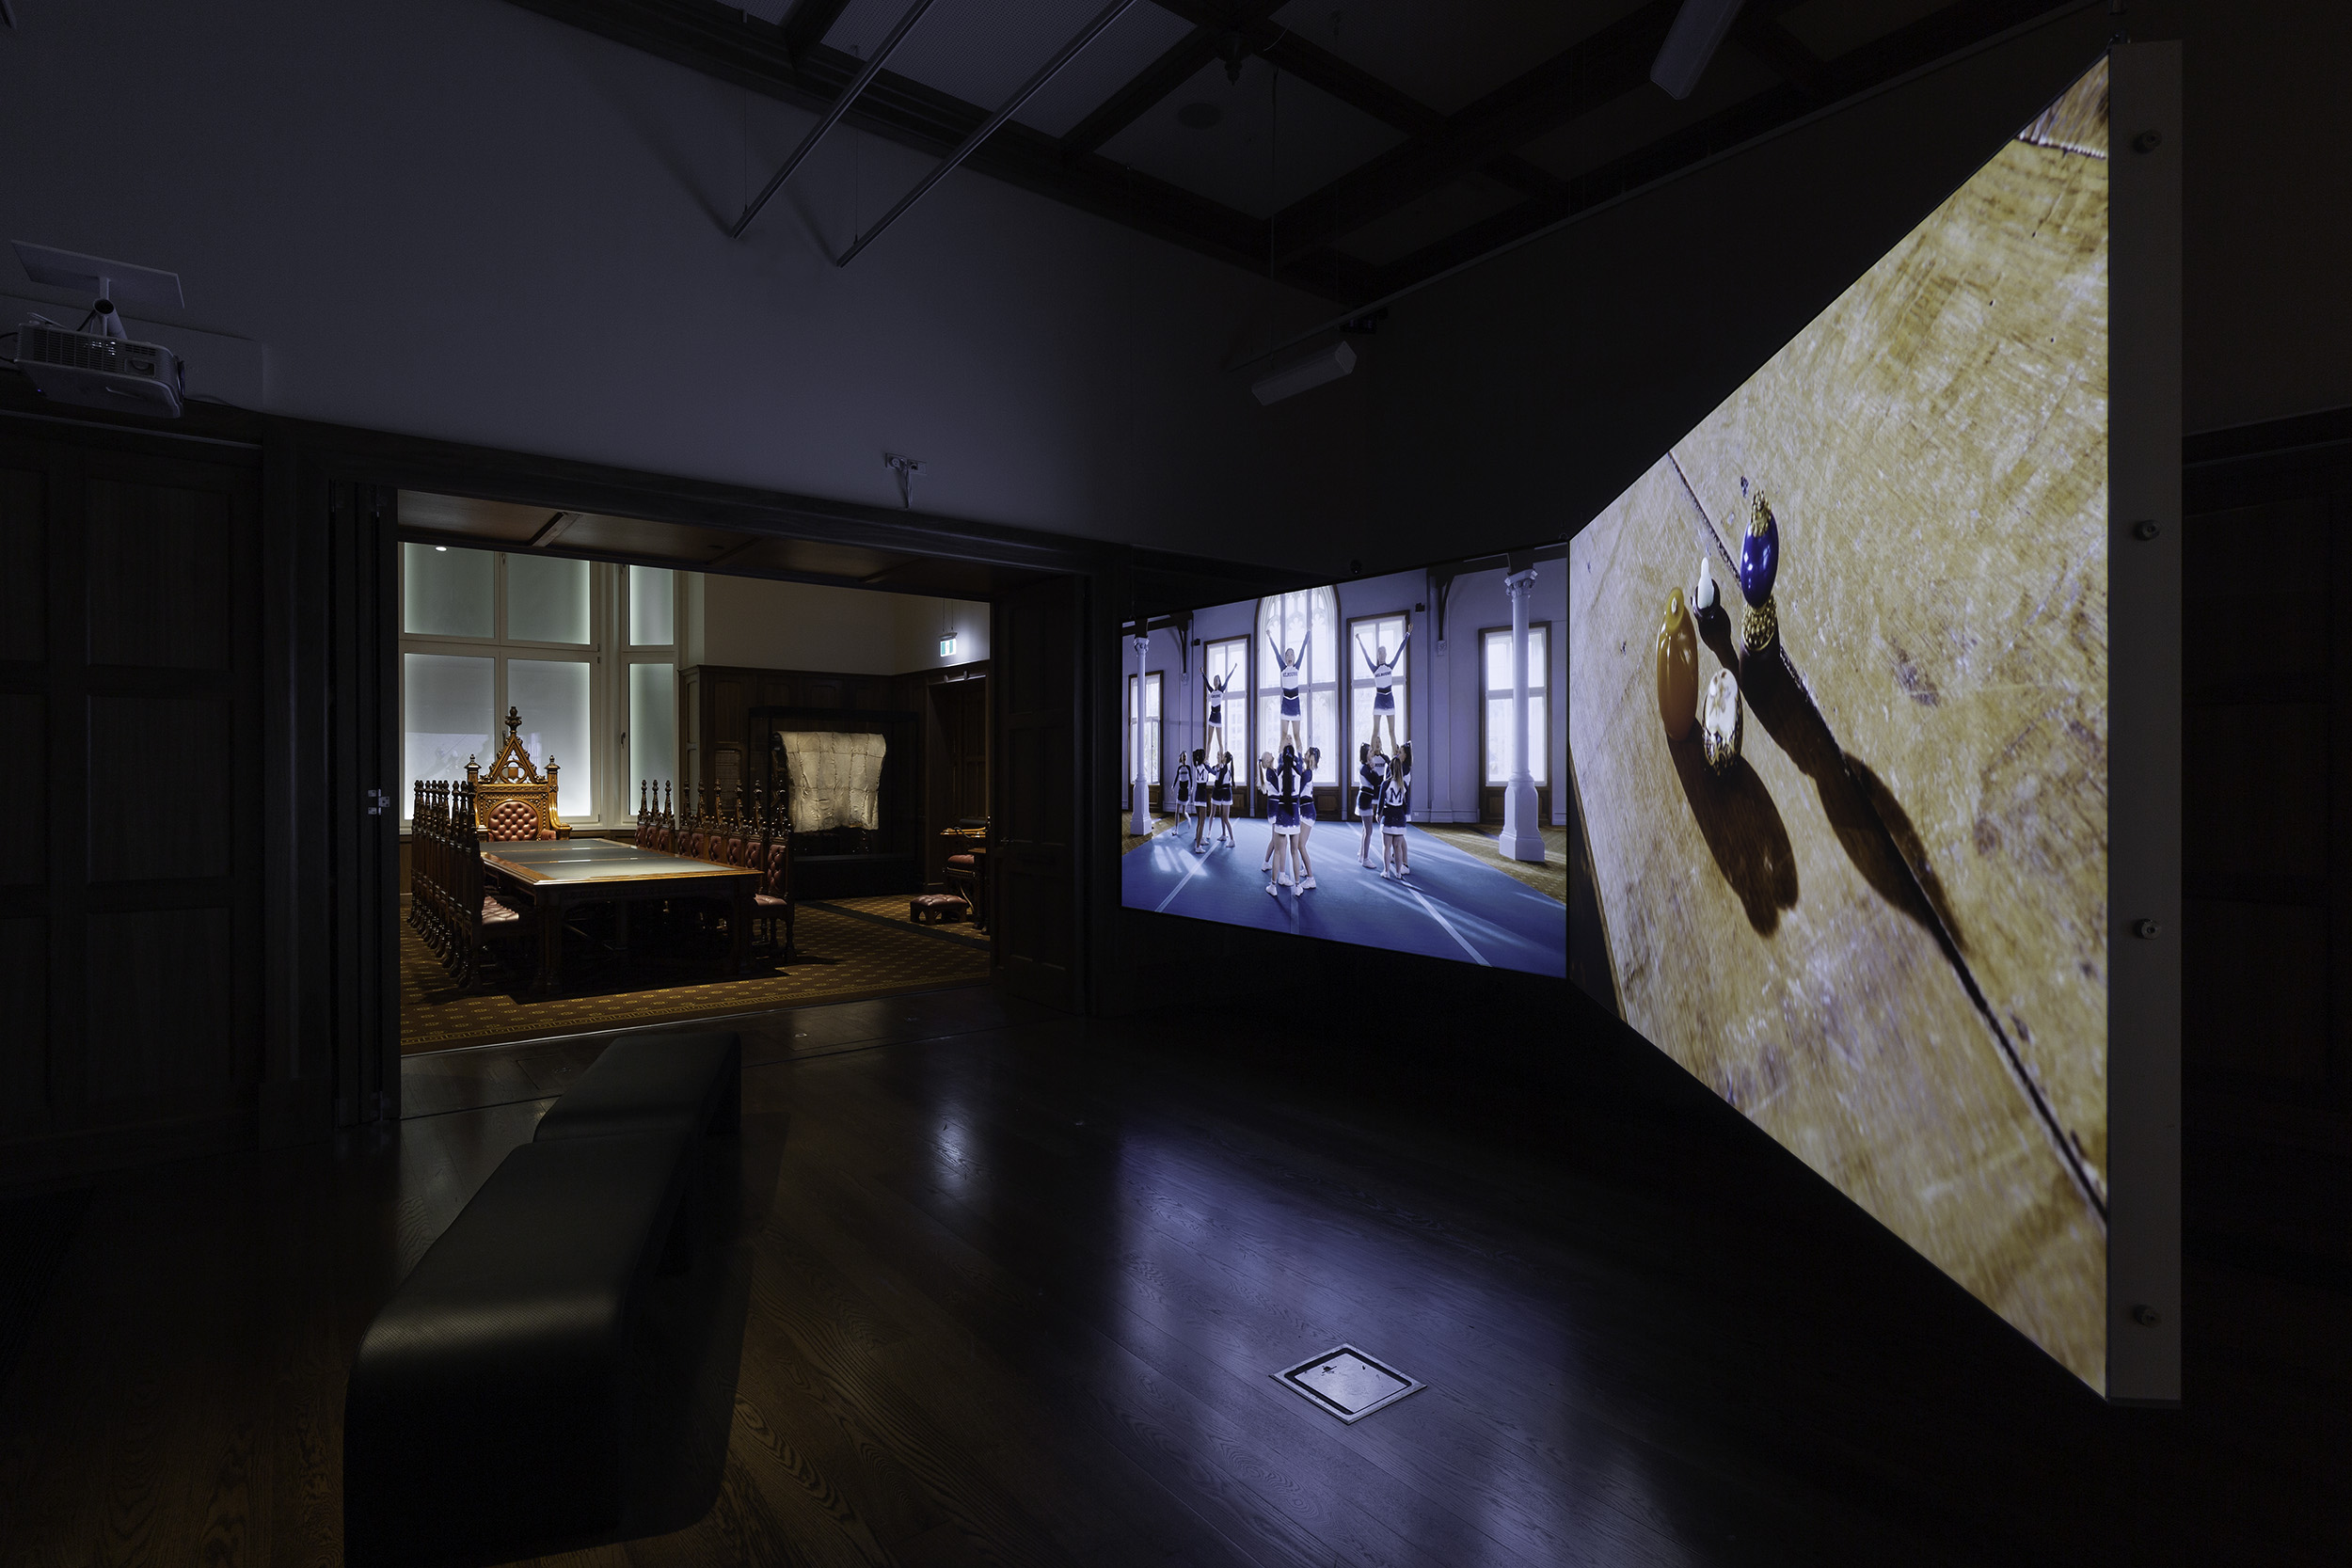 Installation view of Andy Butler, The Agony and the Ecstasy 2022, 2-channel video, 8 min. On display in Collective Unease at the Ian Potter Museum of Art, Old Quadrangle, University of Melbourne. Photo: Christian Capurro. Courtesy of the curators.